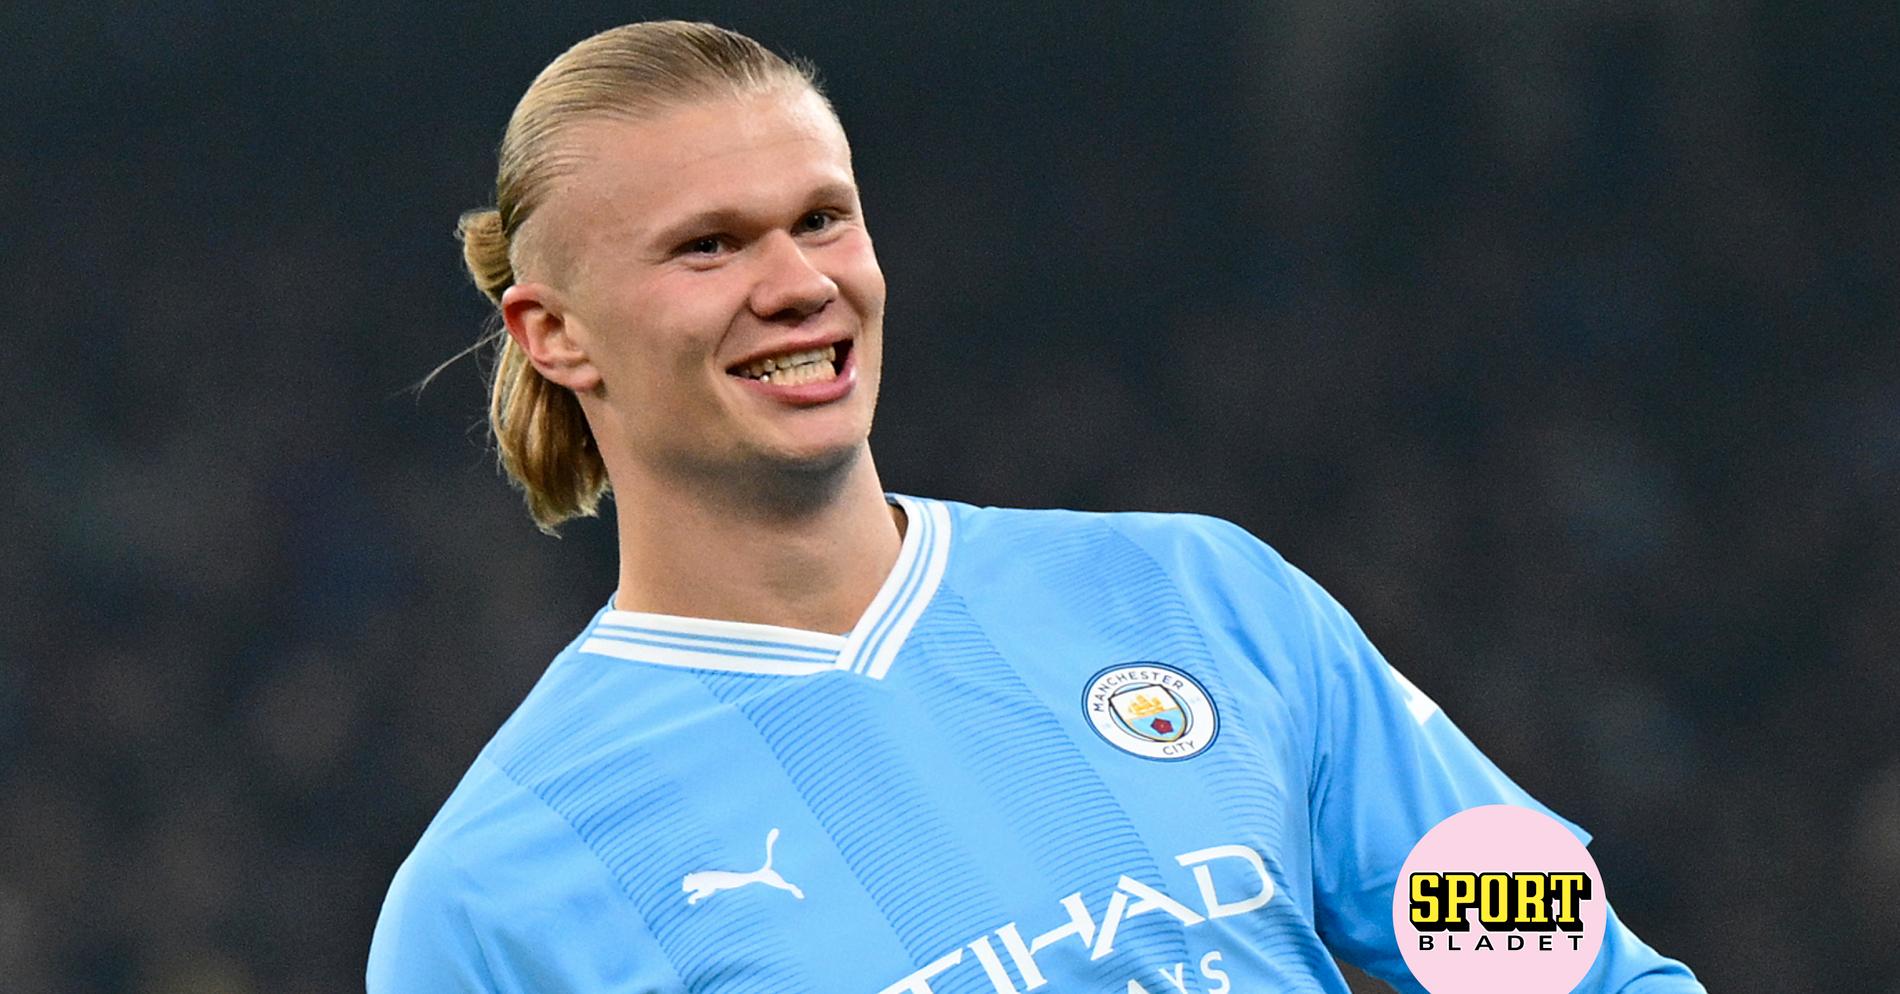 Erling Braut Haaland: Unstoppable Scoring Record in Champions League and Premier League